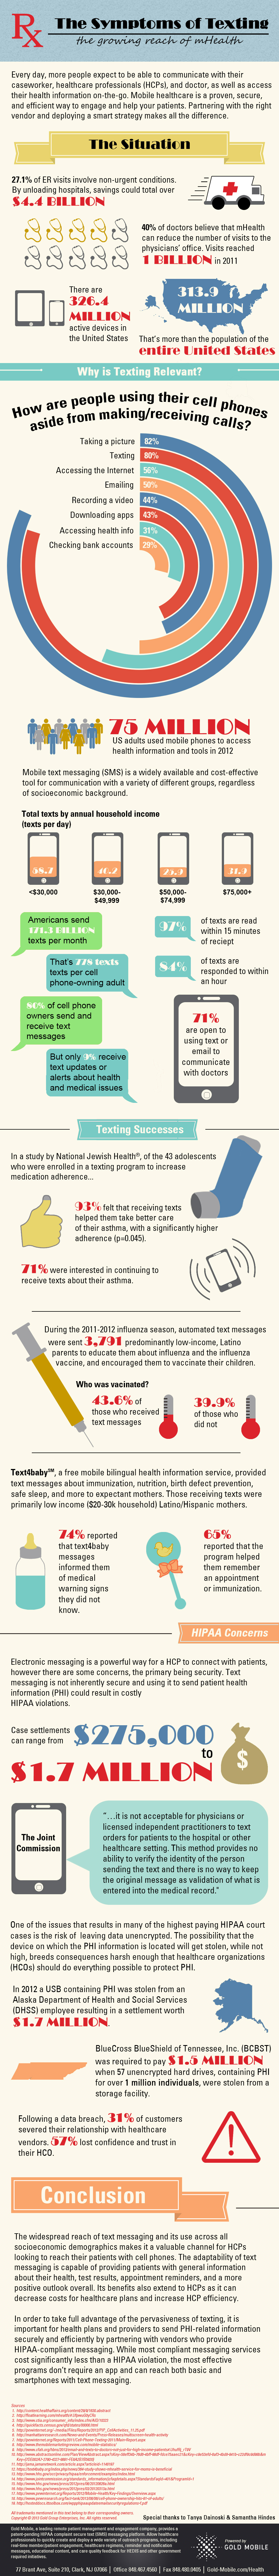 The Symptoms of Texting: the growing reach of mHealth